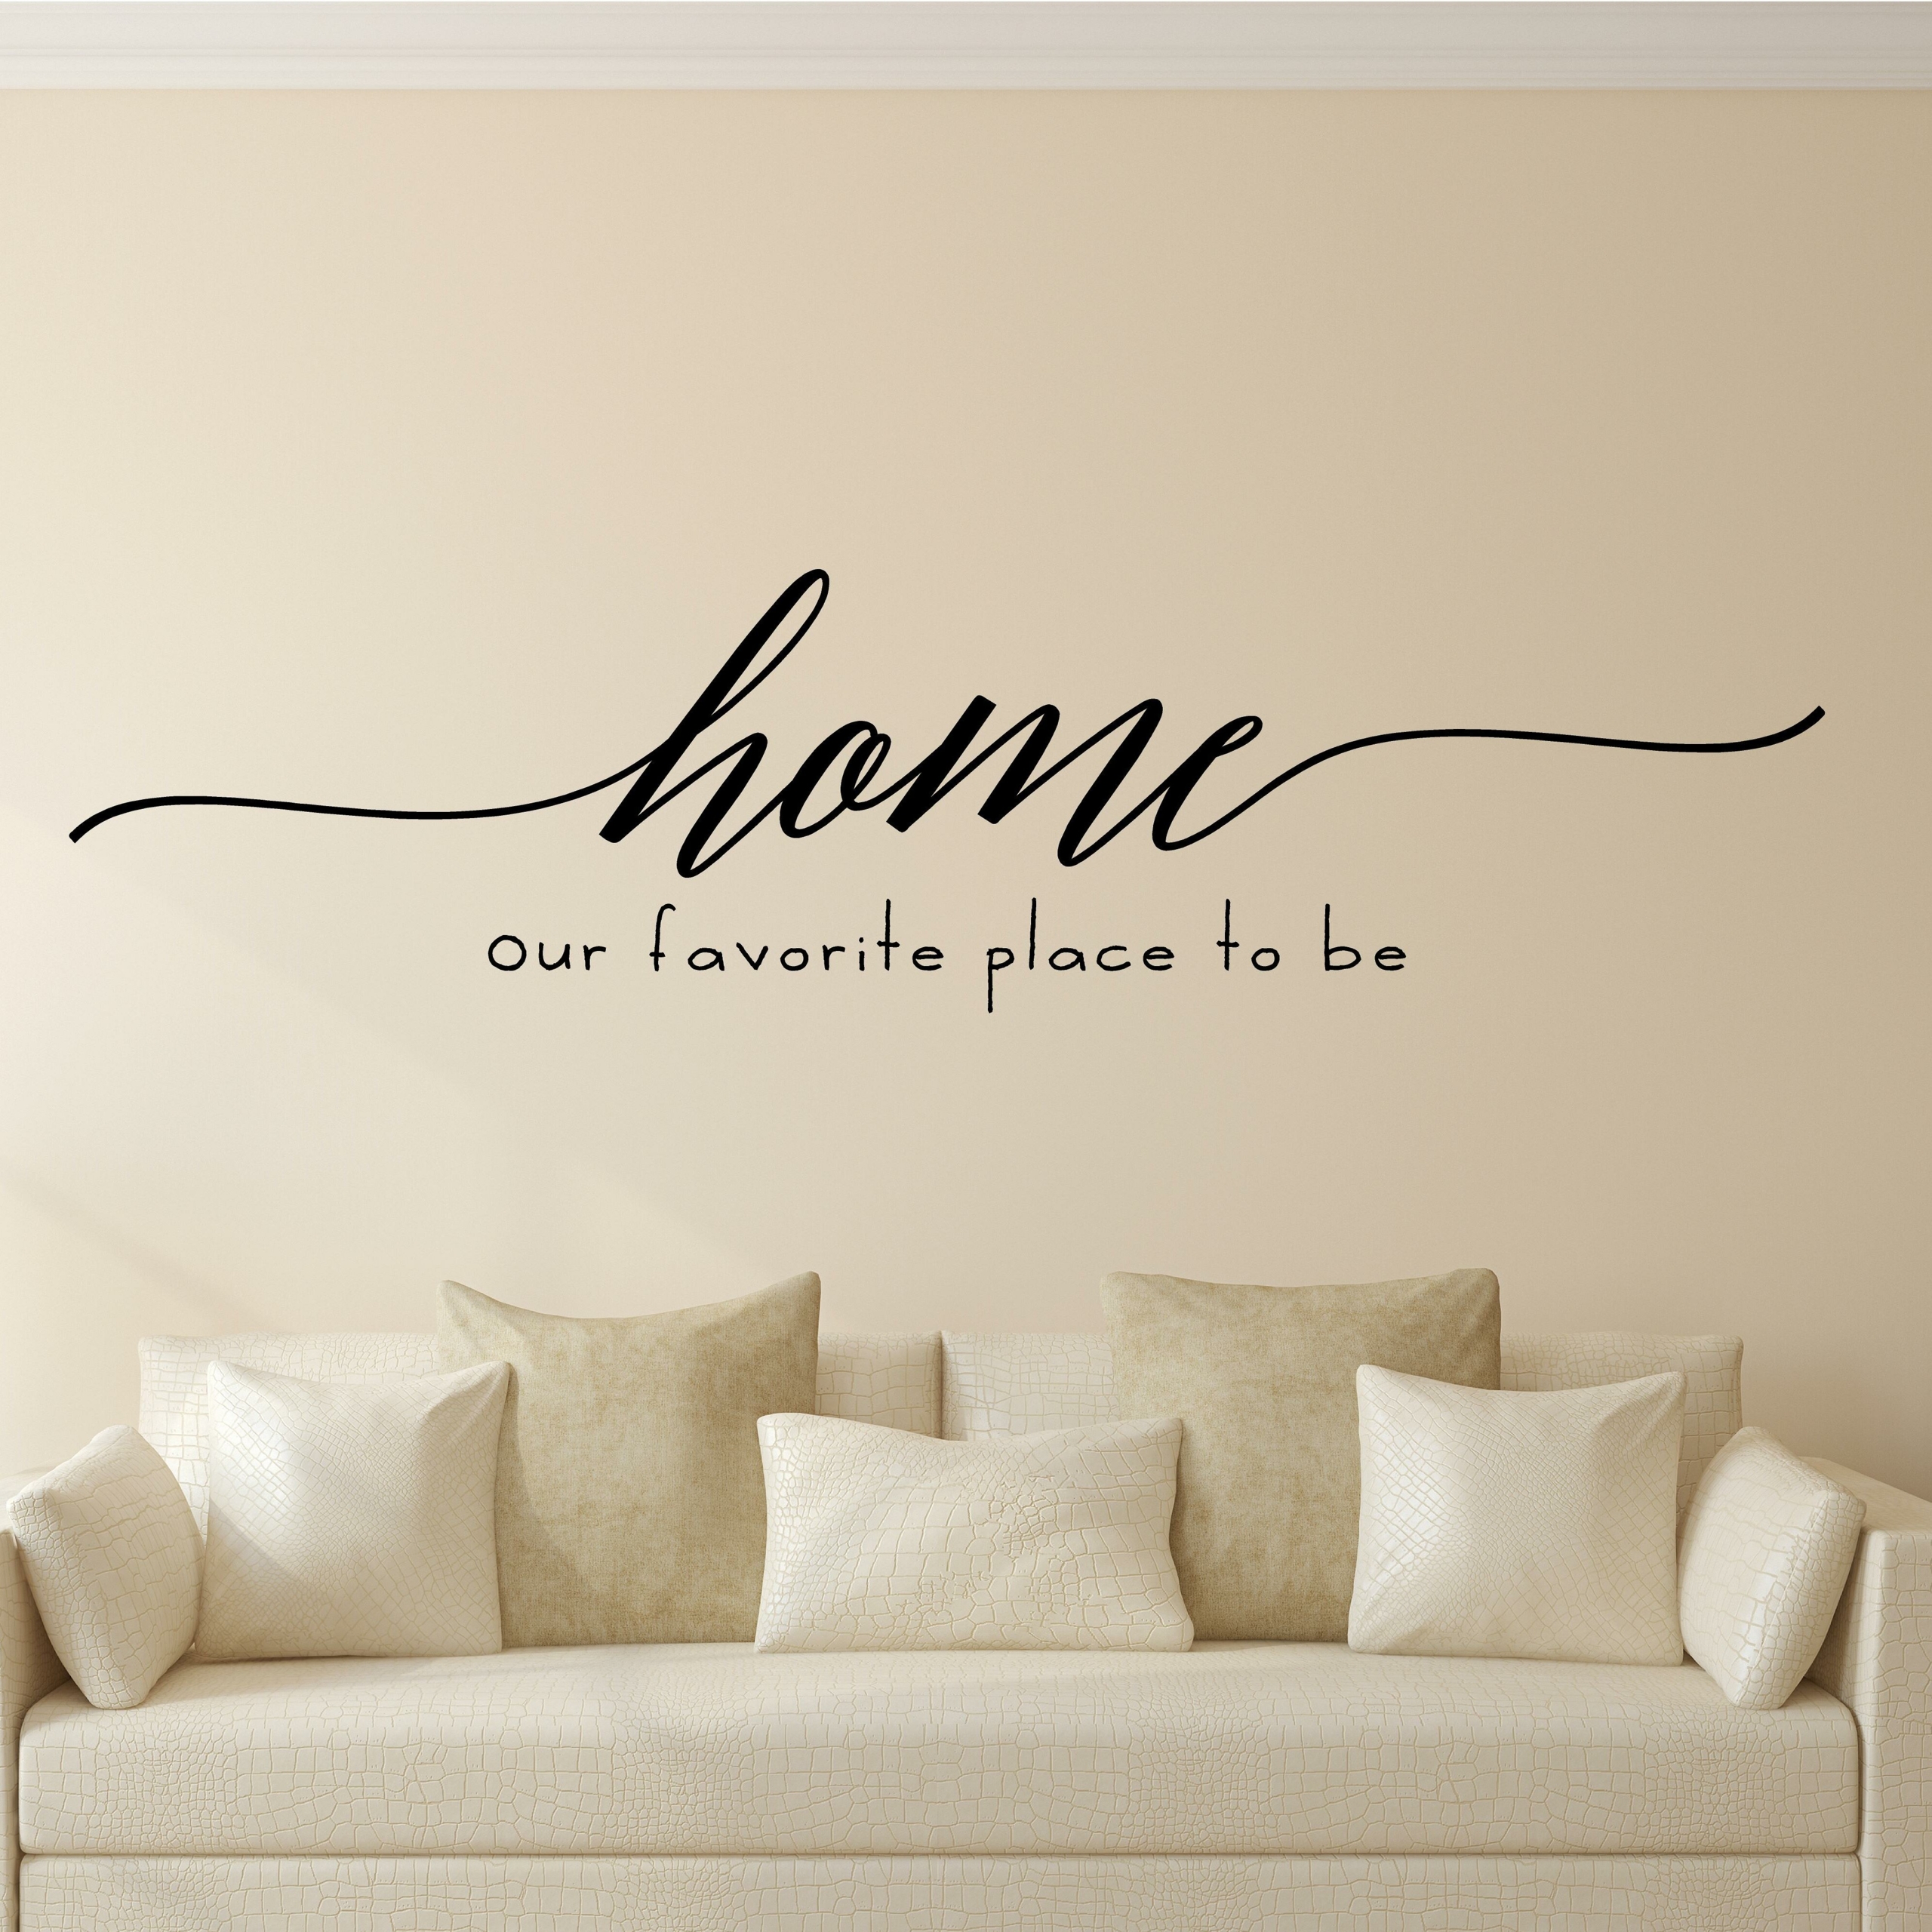 Wall Stickers For Living Rooms Visualhunt